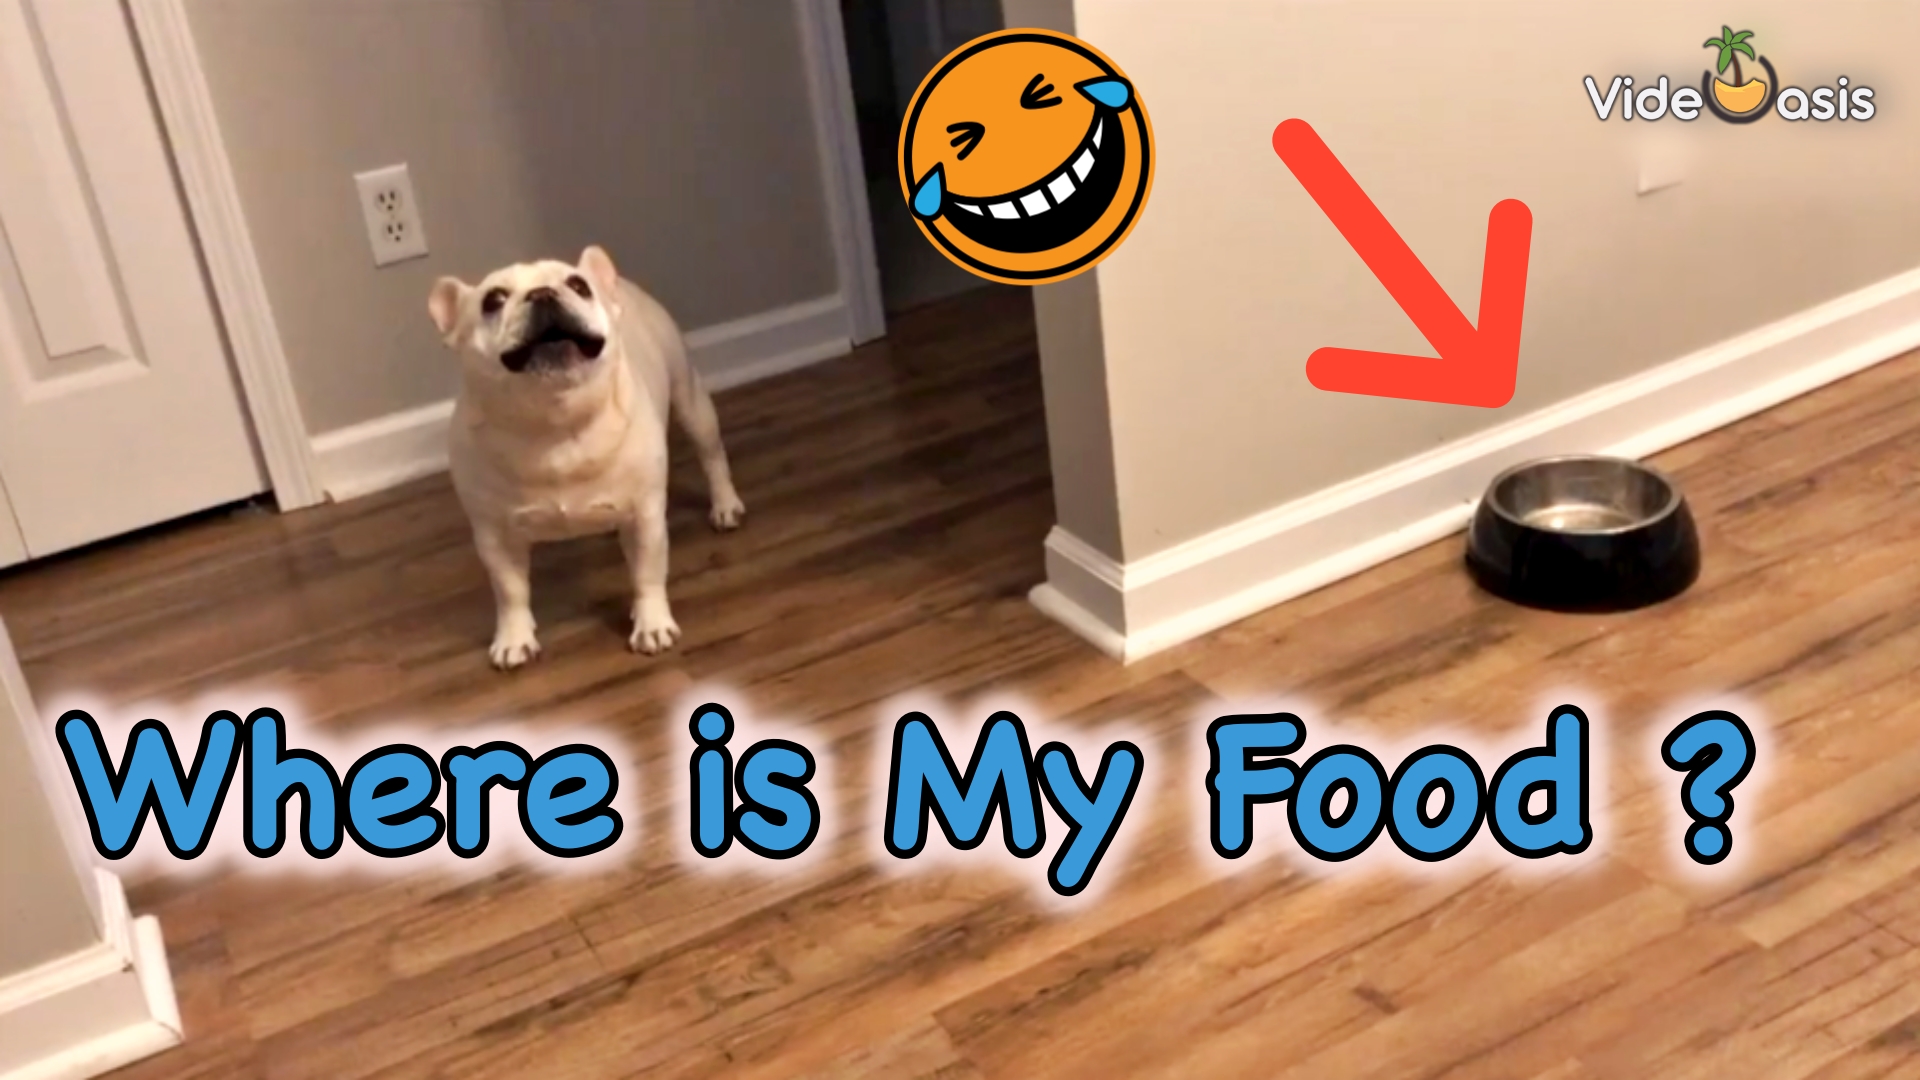 French Bulldog Throws Tantrums for Not Getting Food｜VideOasis